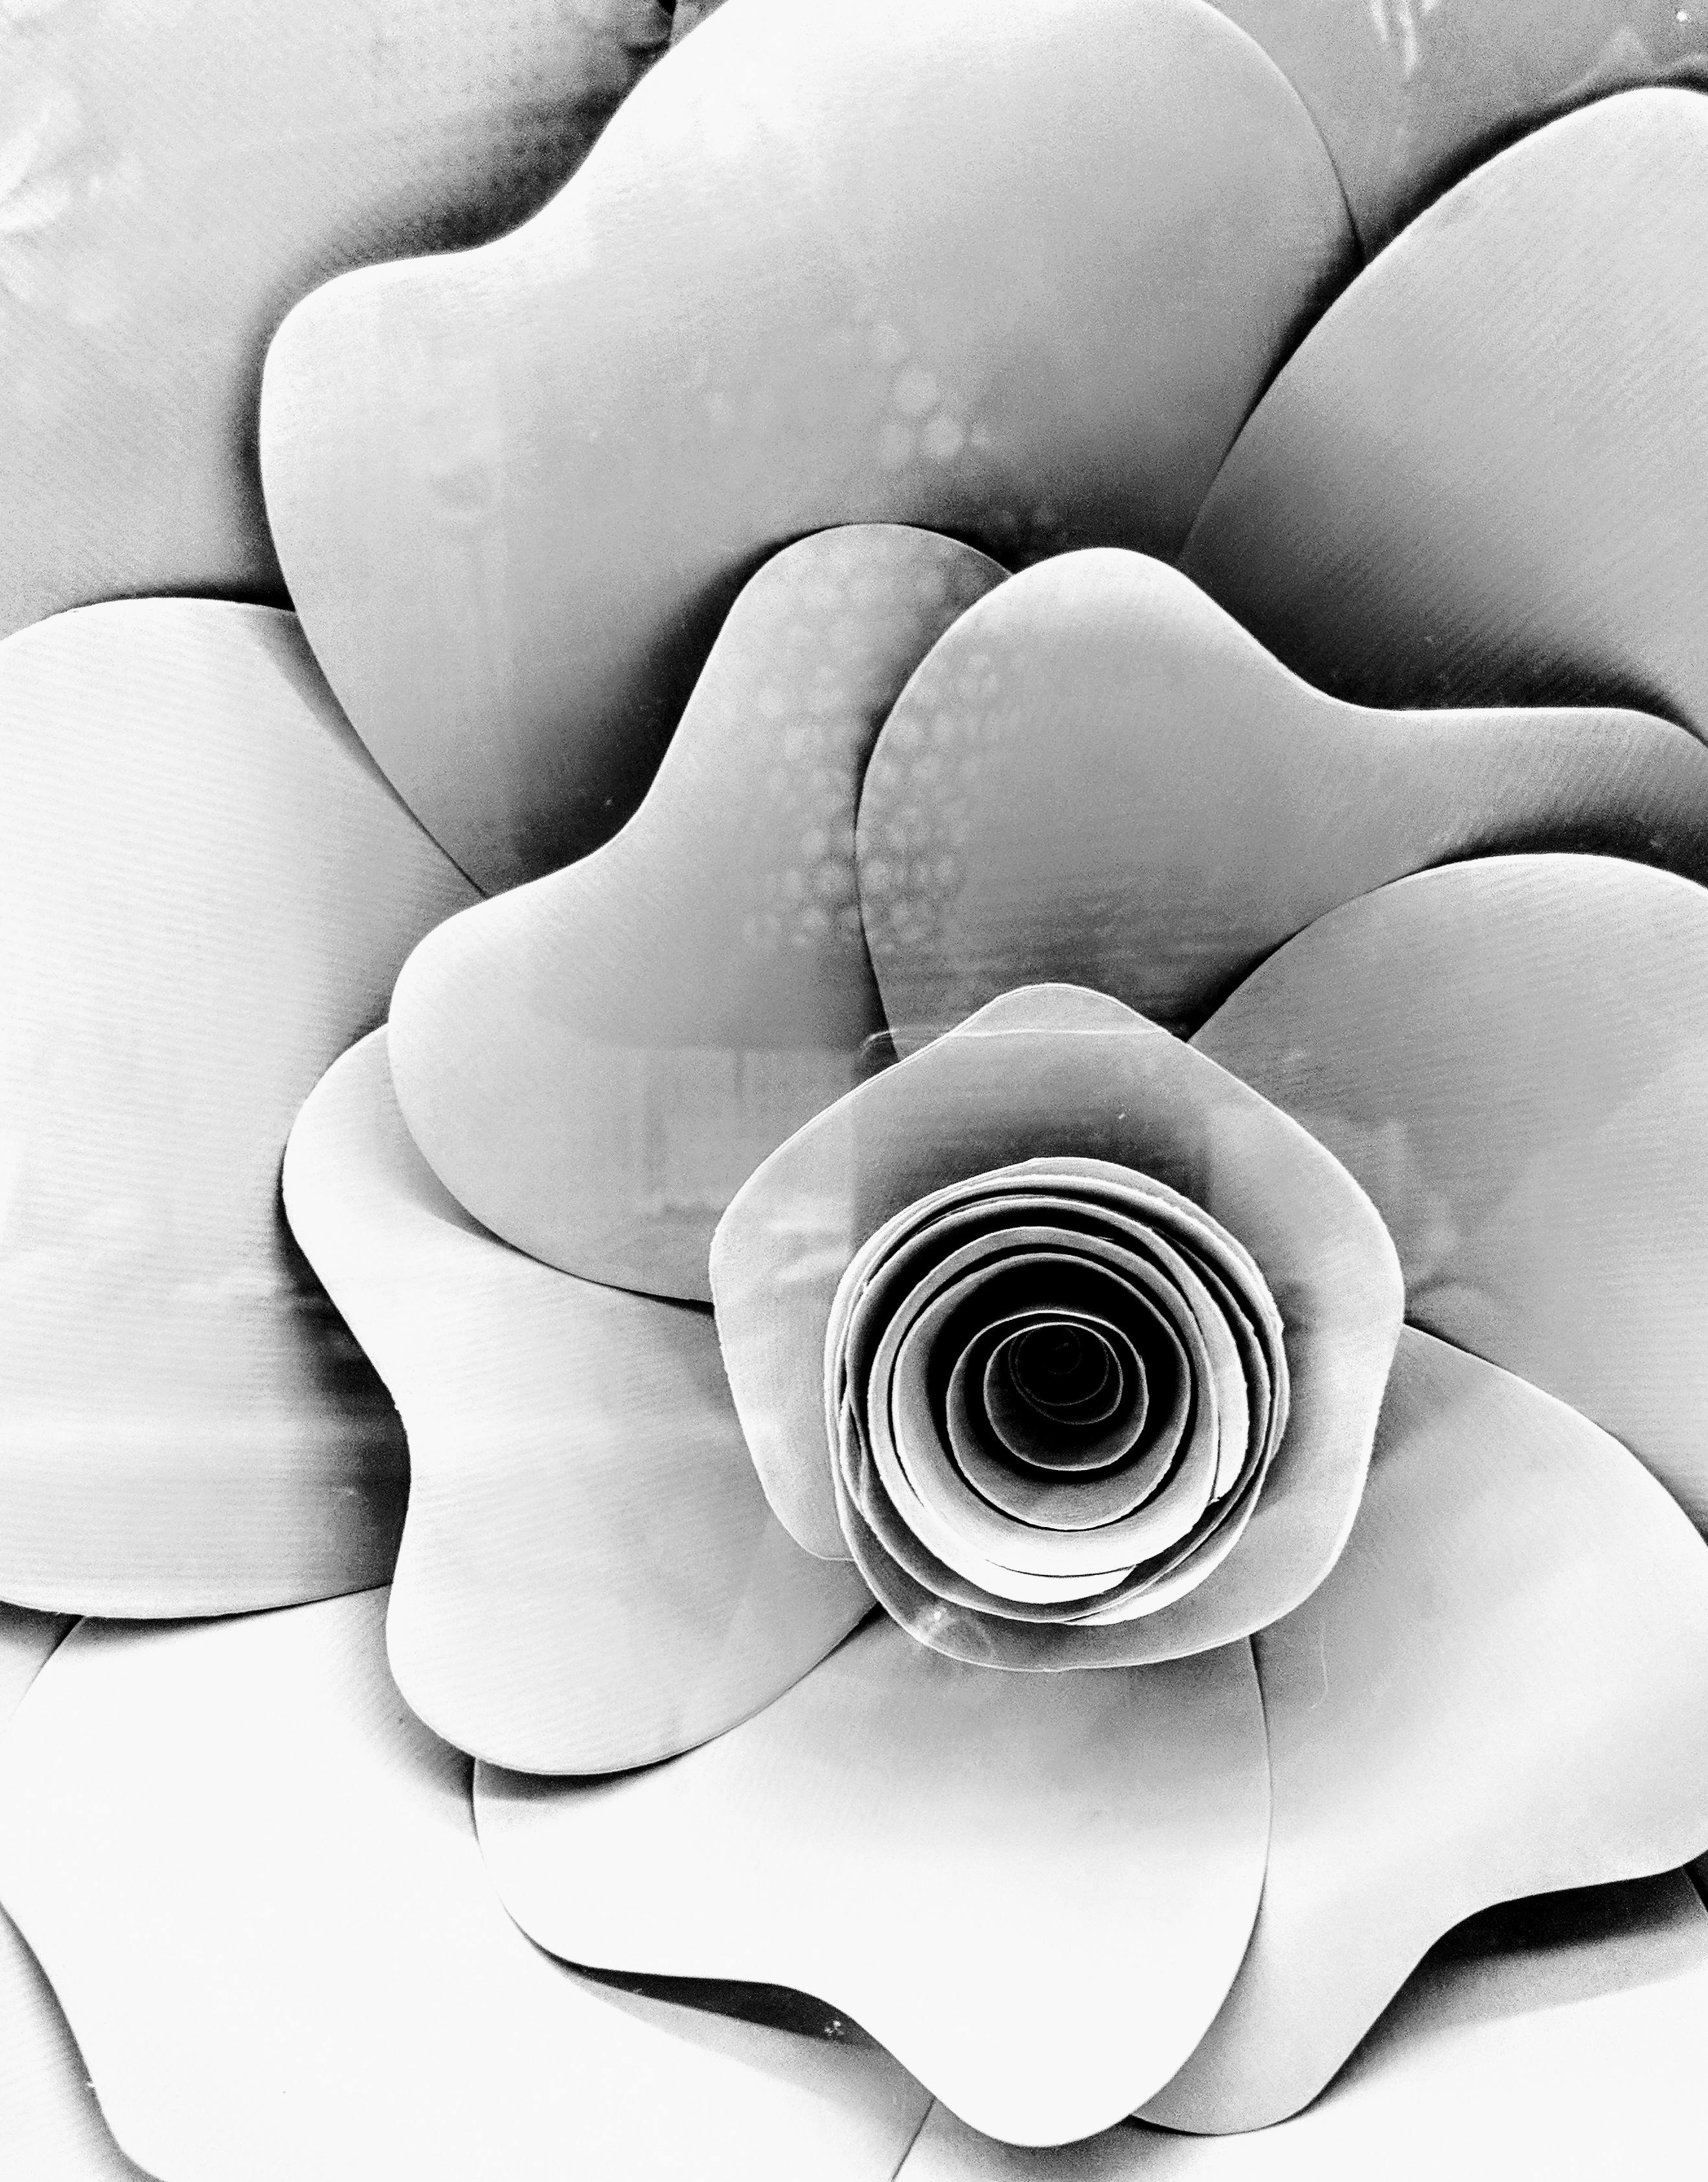 Free stock photo of Black and white flower, close up